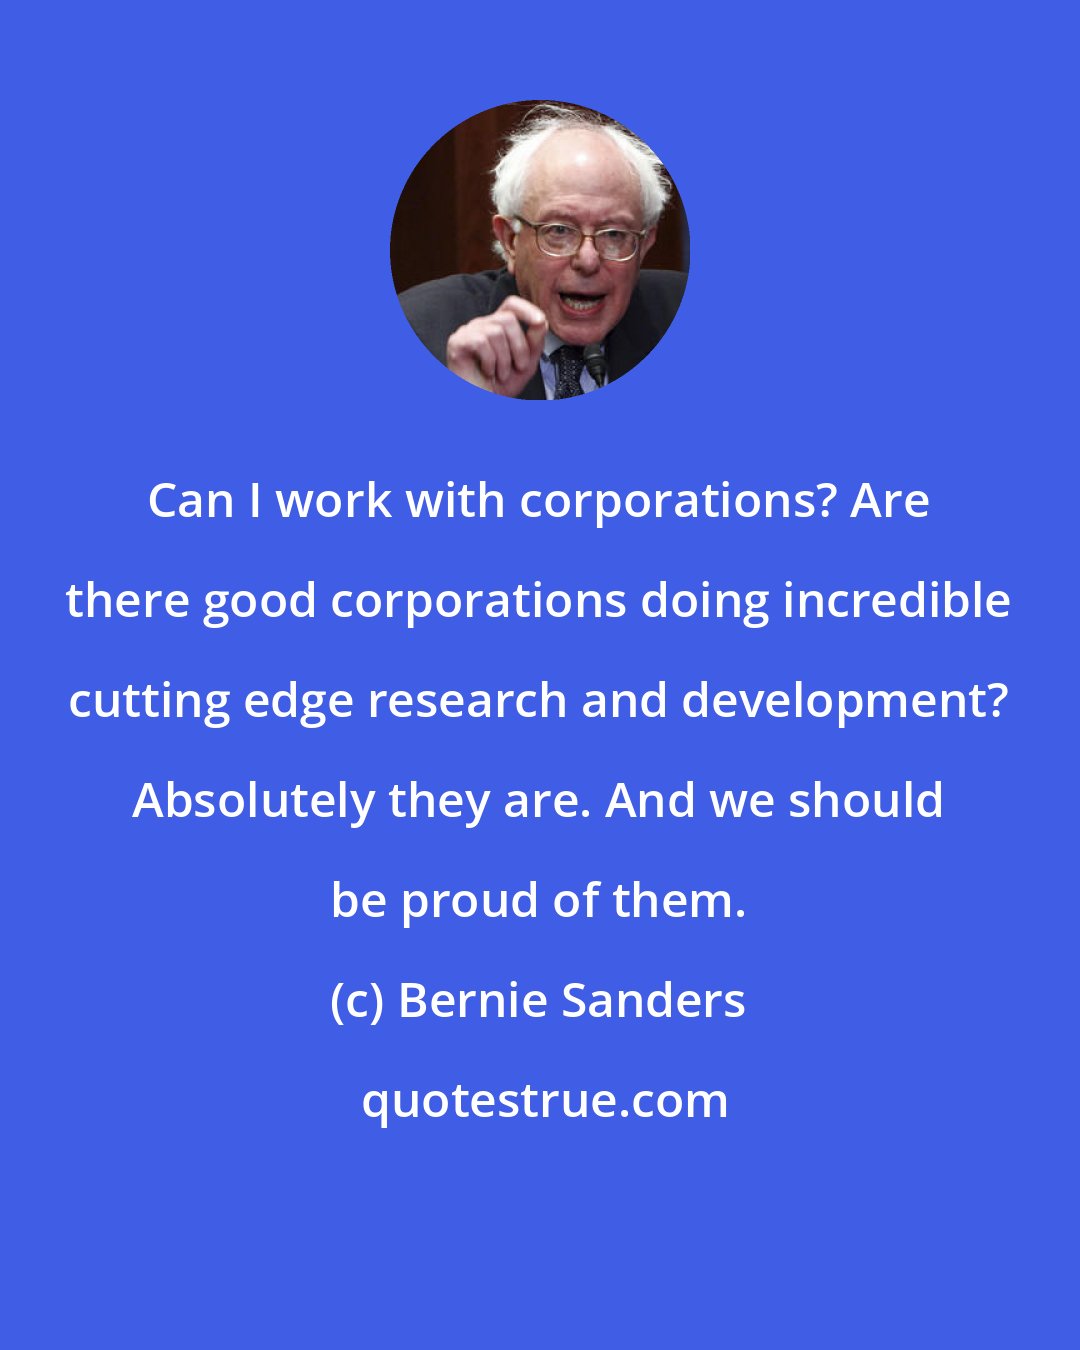 Bernie Sanders: Can I work with corporations? Are there good corporations doing incredible cutting edge research and development? Absolutely they are. And we should be proud of them.